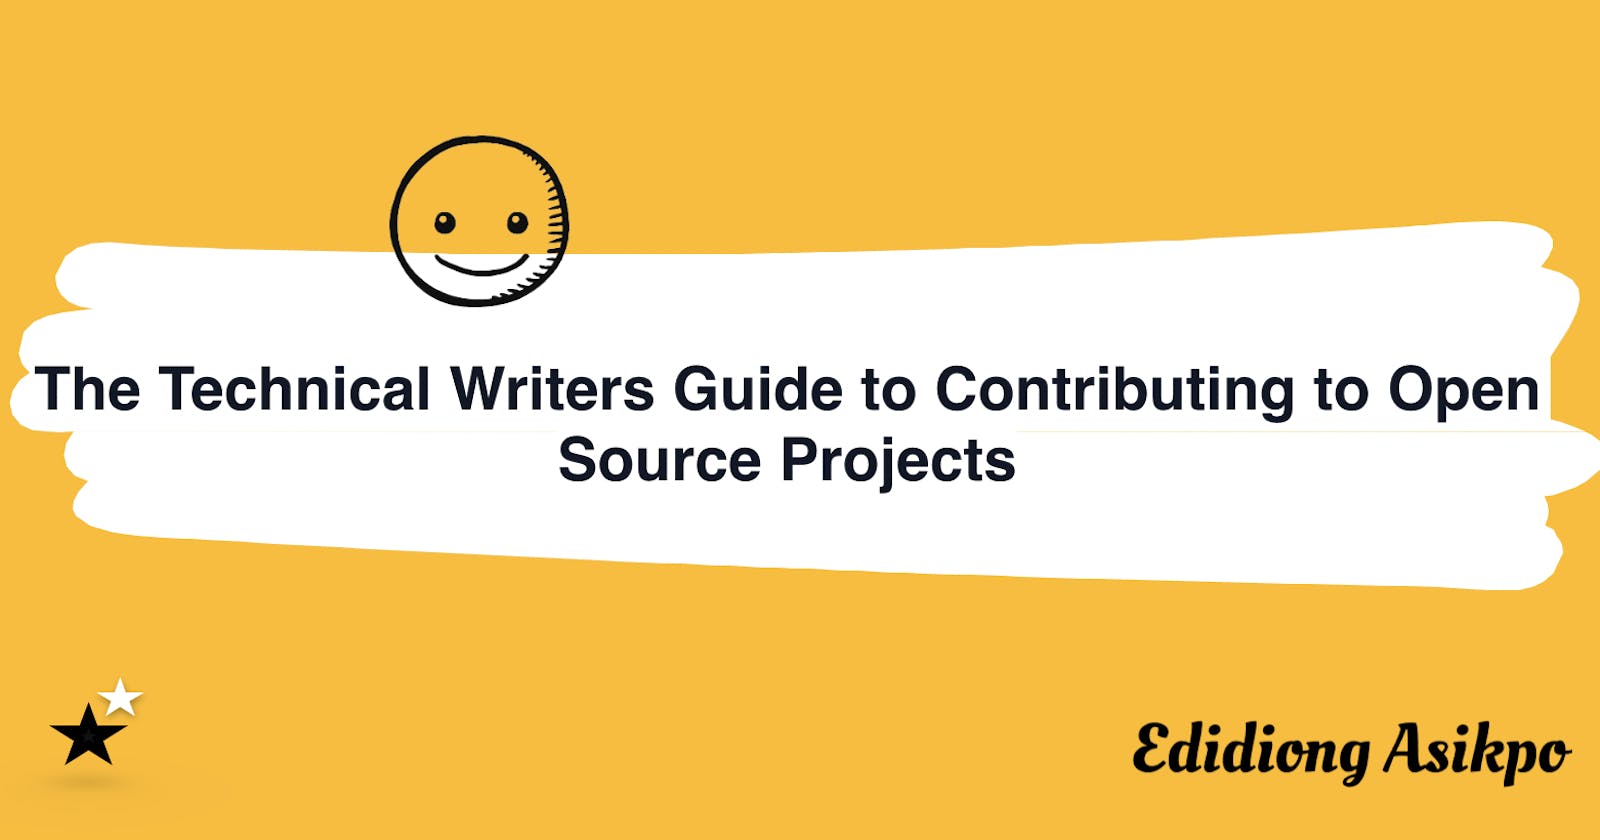 The Technical Writers Guide to Contributing to Open Source Projects